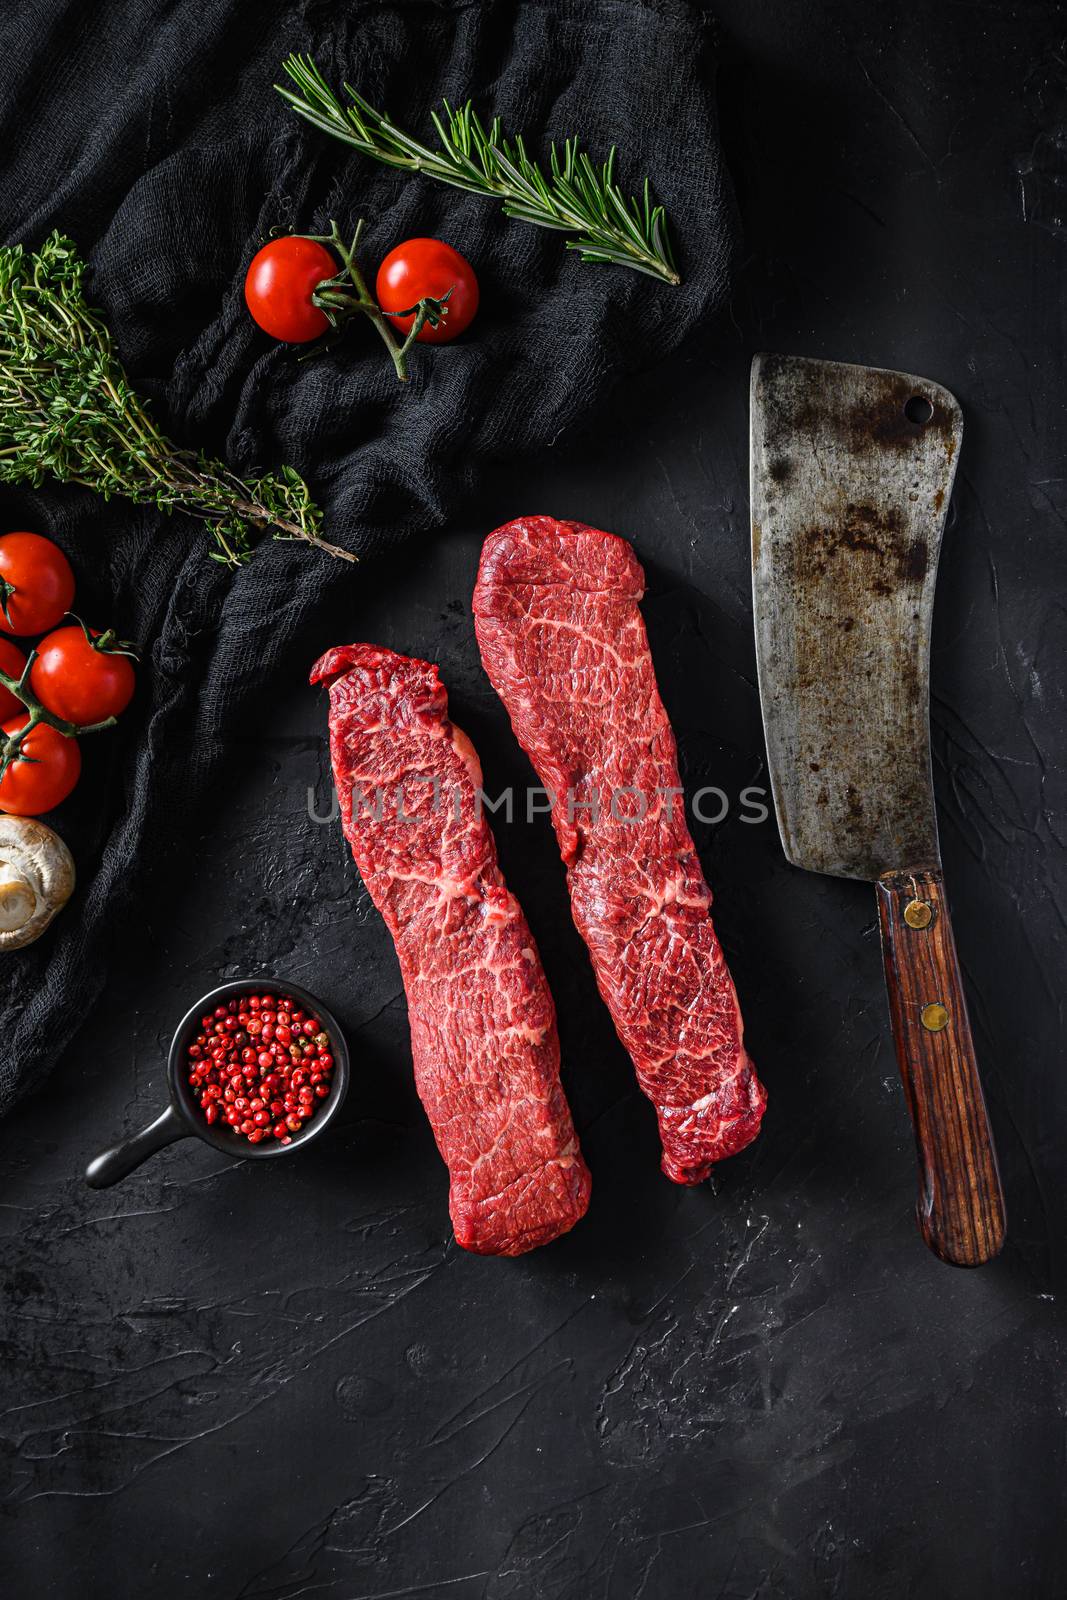 Raw set of denver cut organic meat with vegetable rosemary and other ingredients near butcher meat clever knife for bbq or grill over black stone background top view vertical.